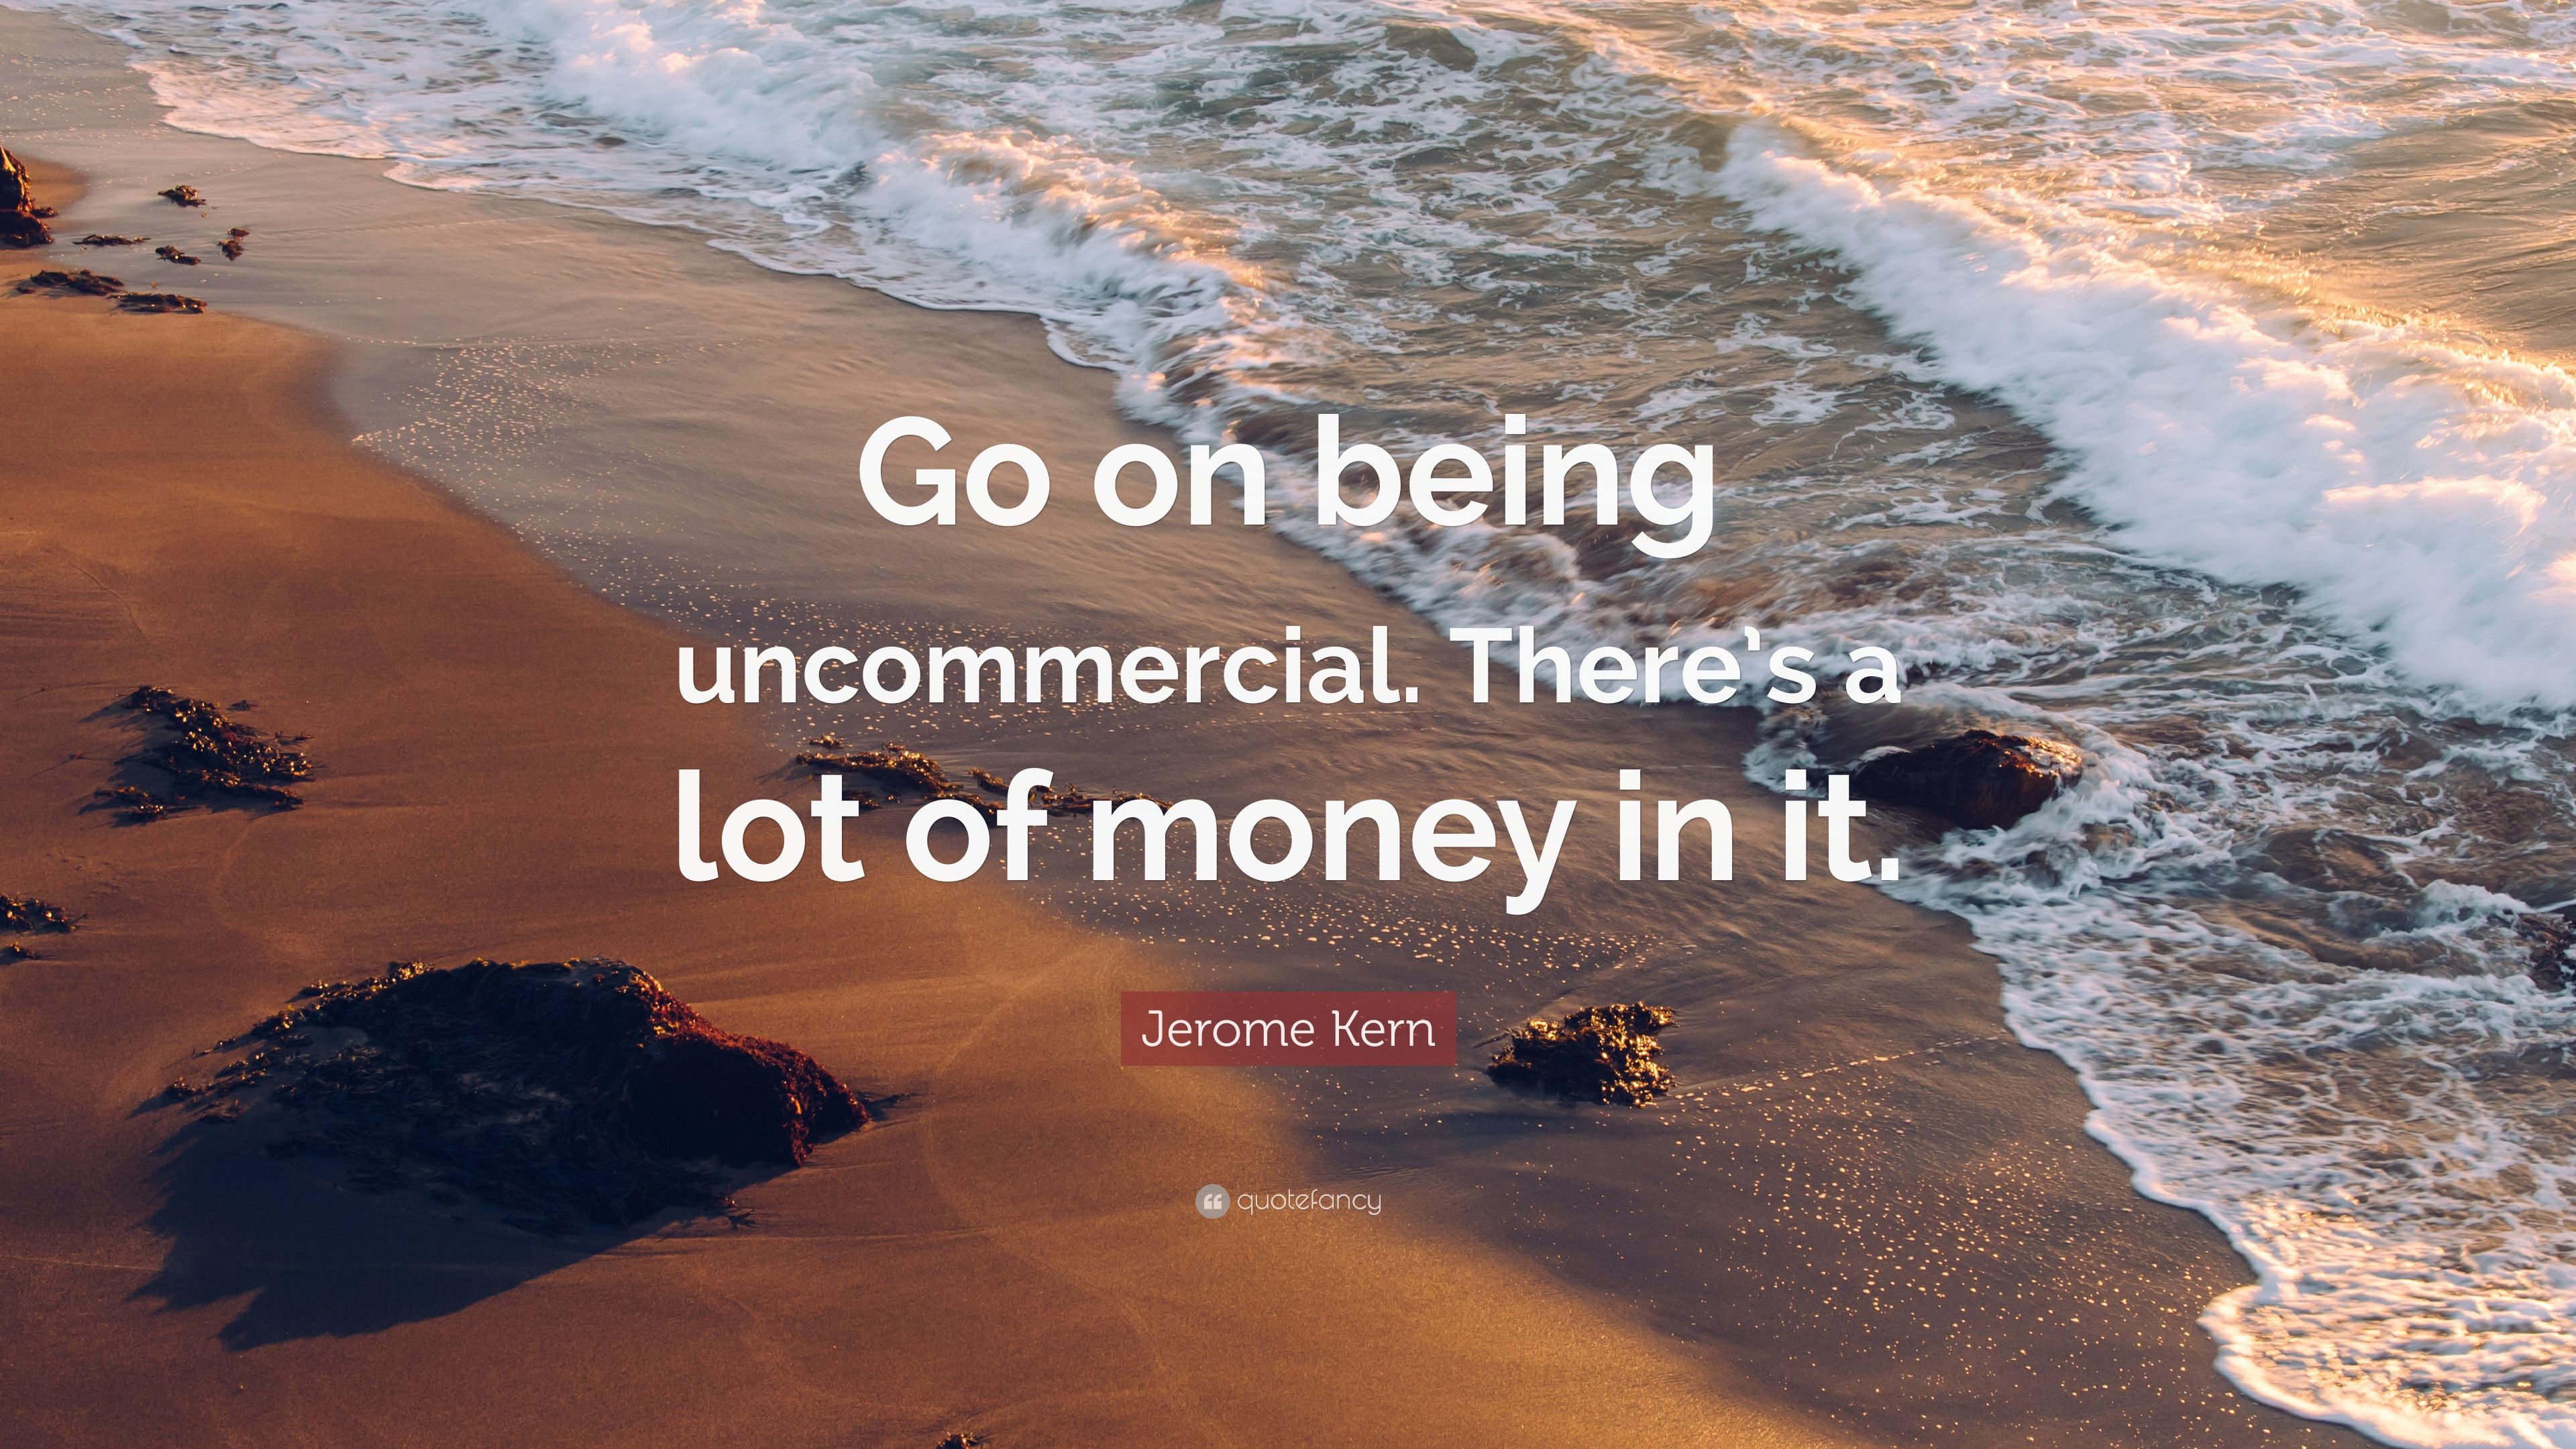 Jerome kern quote âgo on being unmercial theres a lot of money in itâ